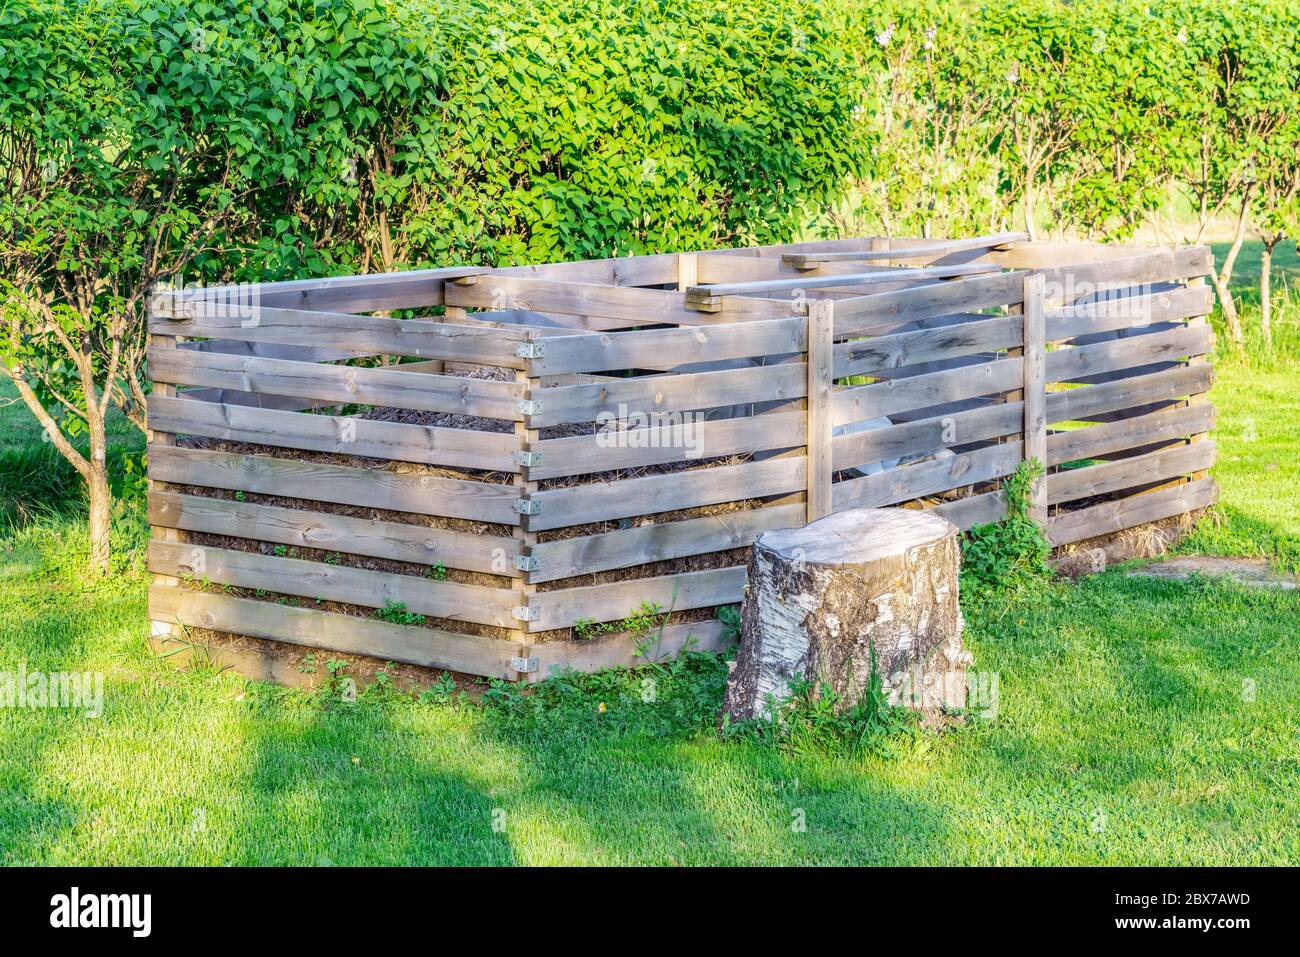 https://c8.alamy.com/comp/2BX7AWD/very-large-three-section-wooden-compost-box-standing-in-the-swedish-garden-at-countryside-for-ecological-composting-of-food-and-garden-waste-organic-2BX7AWD.jpg